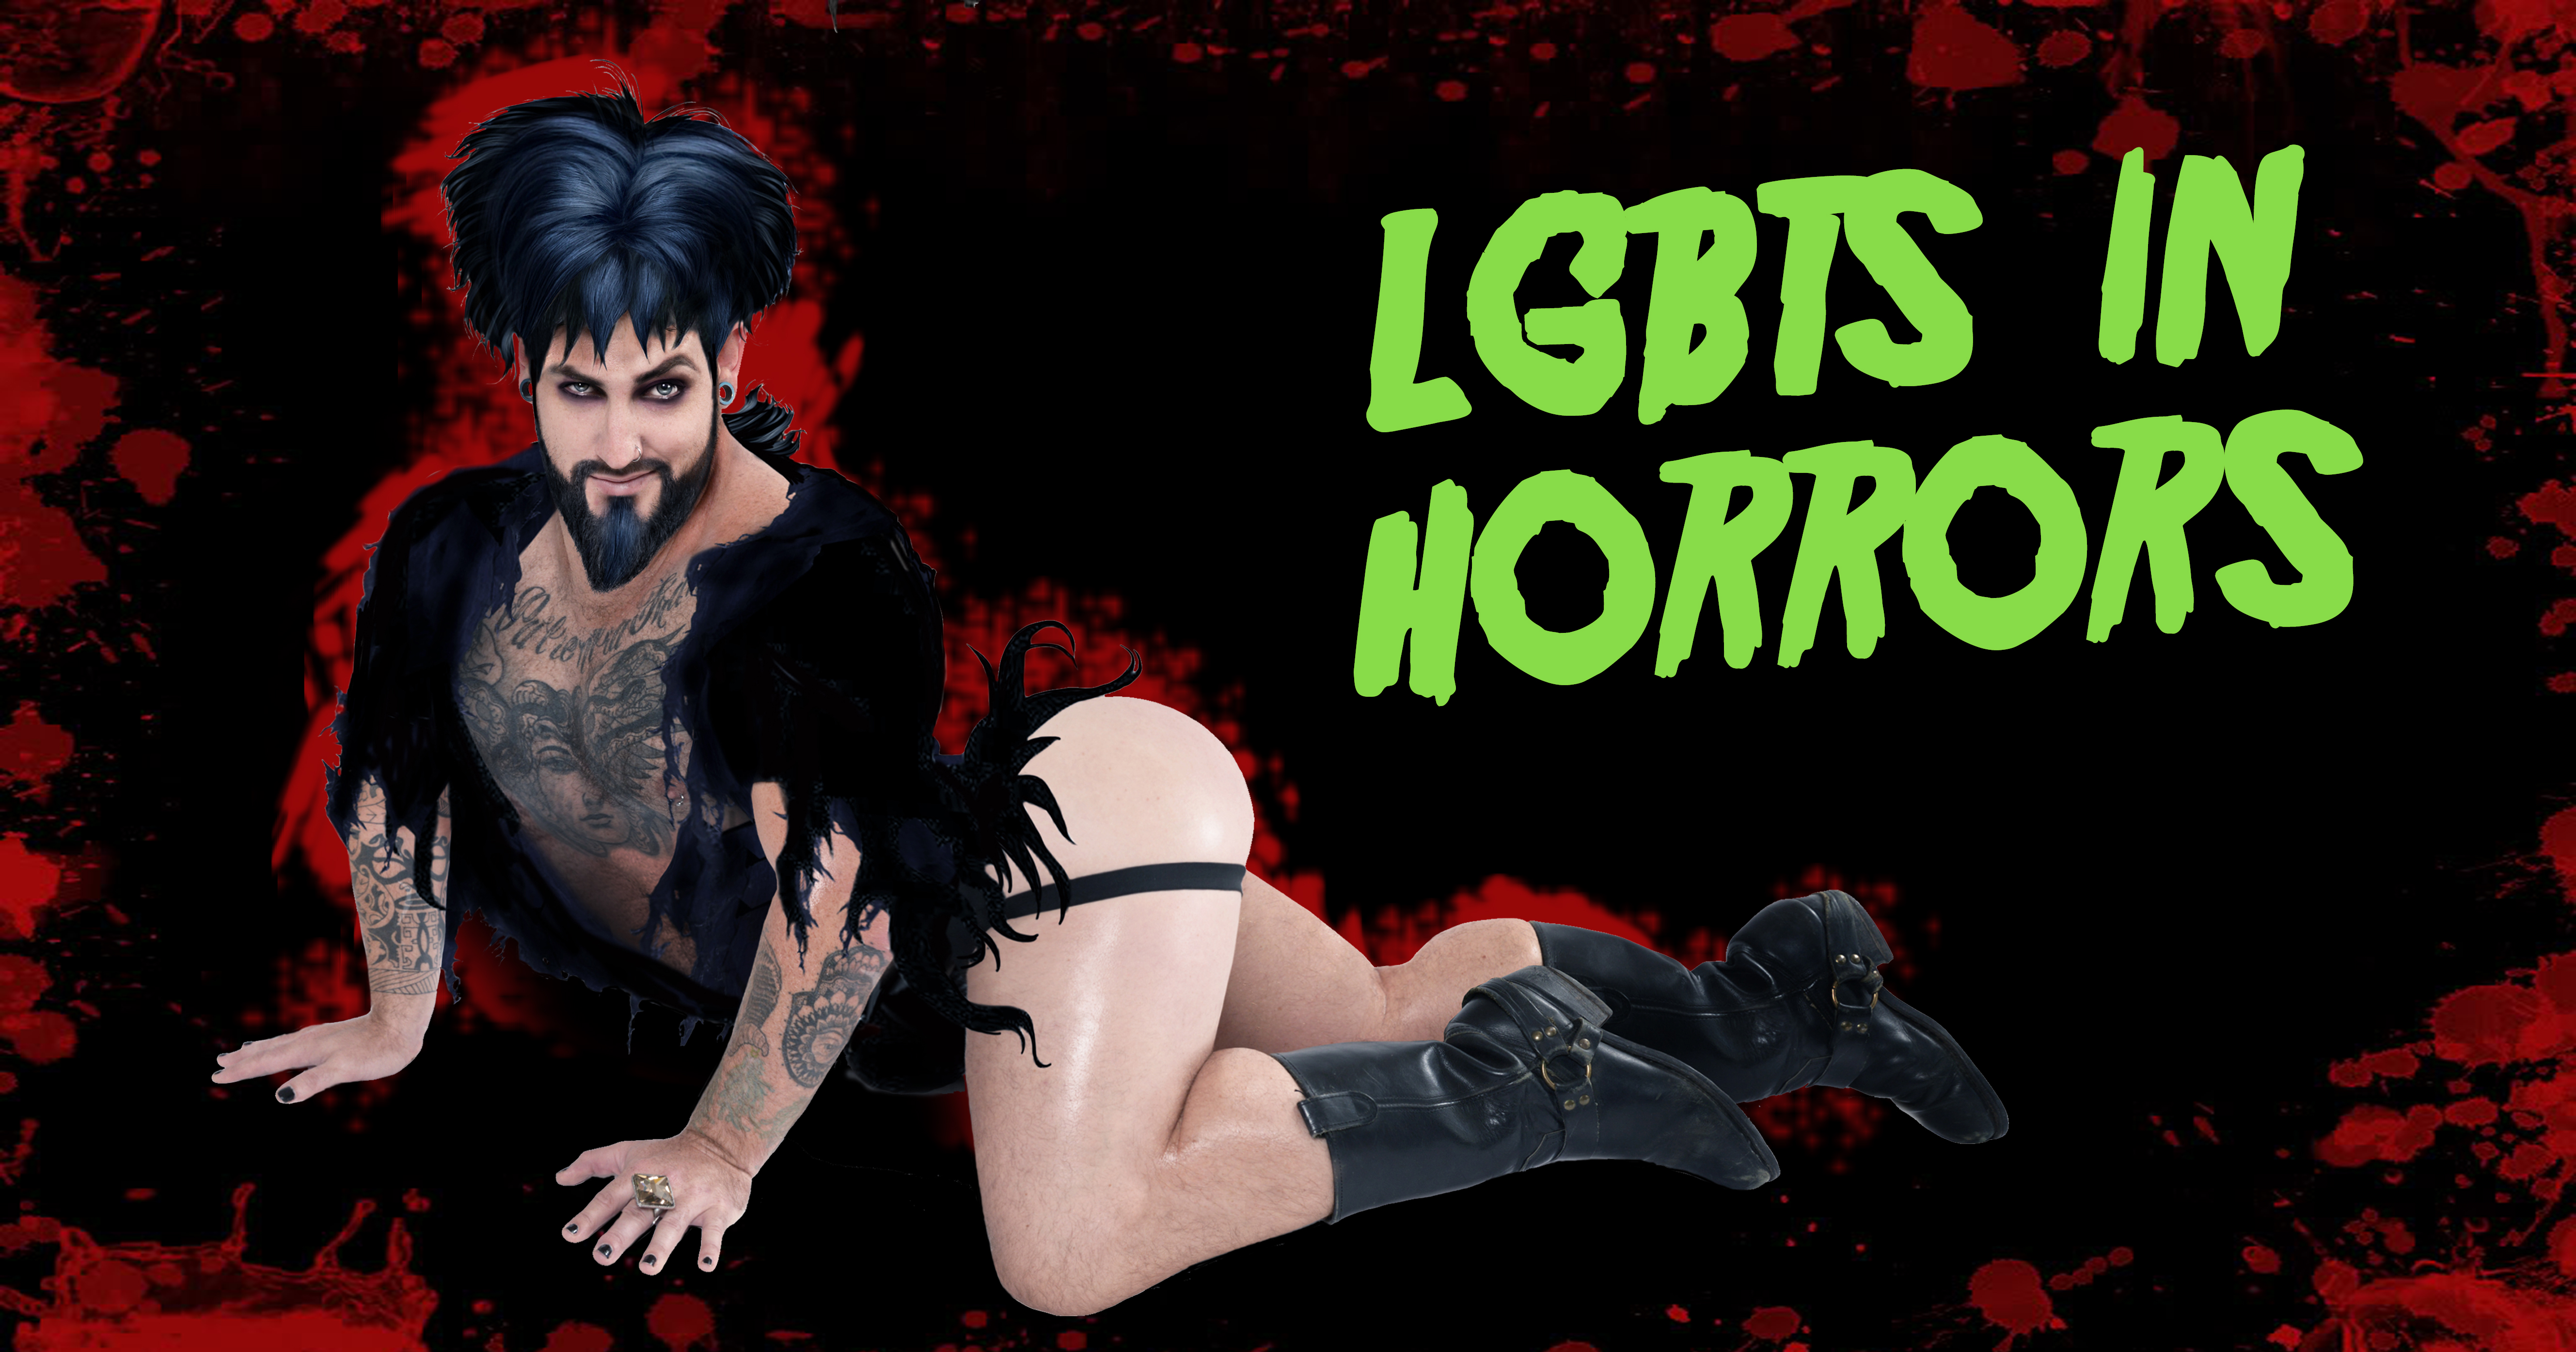 Elvira-themed photoshoot to illustrate LGBT+ characters in horror movies